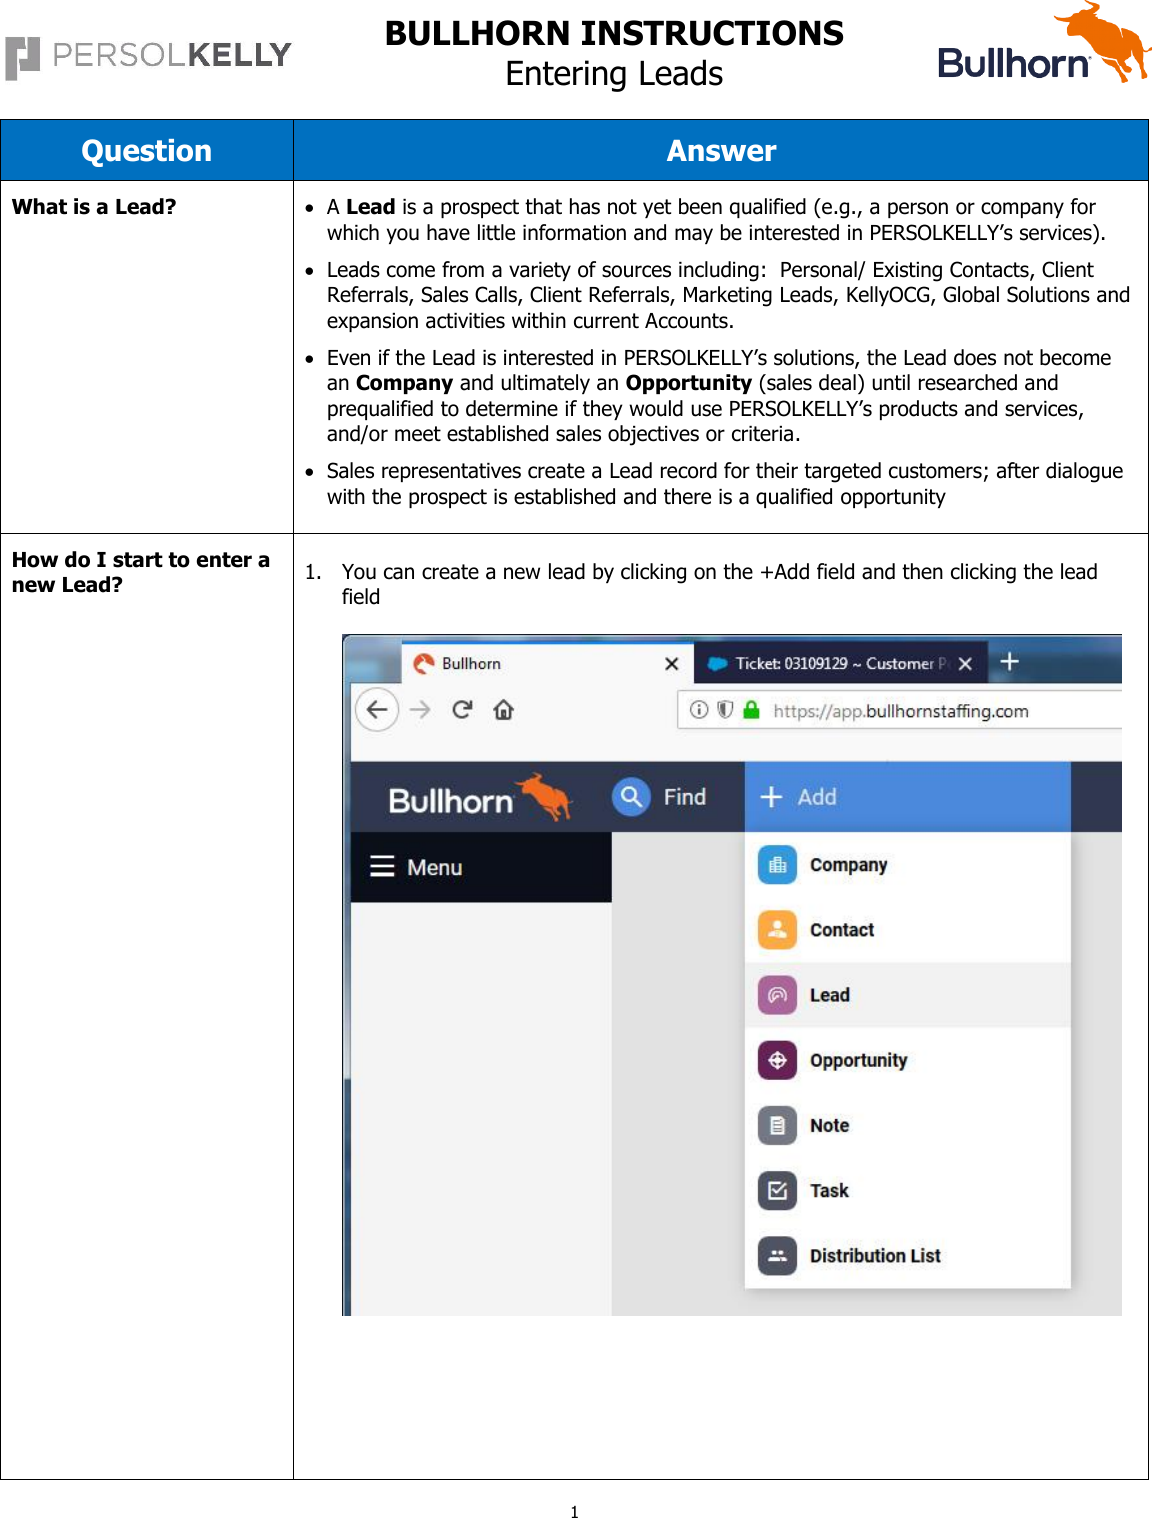 Page 1 of 6 - Salesforce Reference Guide - Entering Leads (e3045) 2. Process Bullhorn Work Instructions